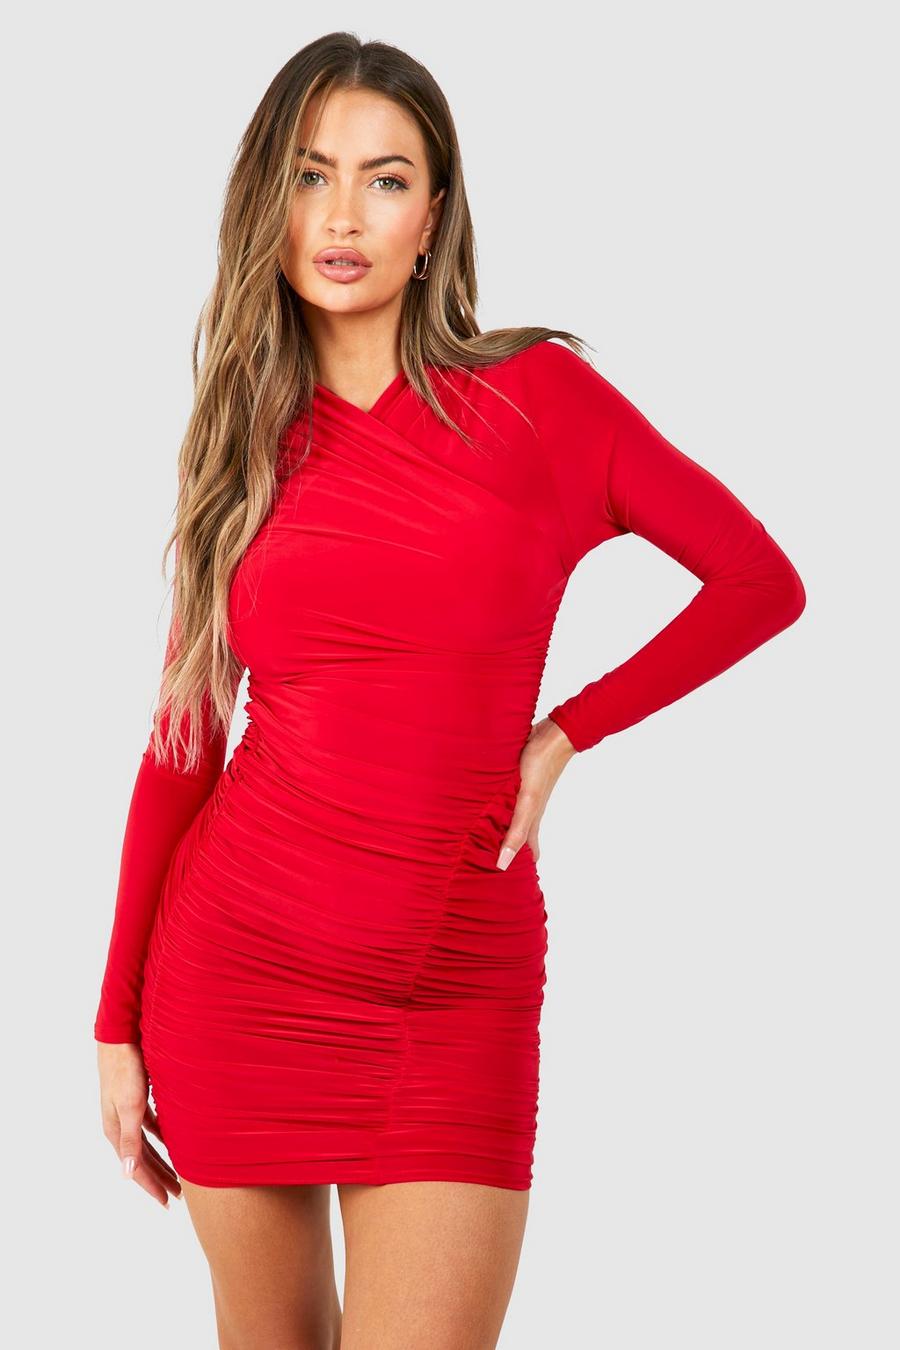 Red s Of Dresses £15 & Under